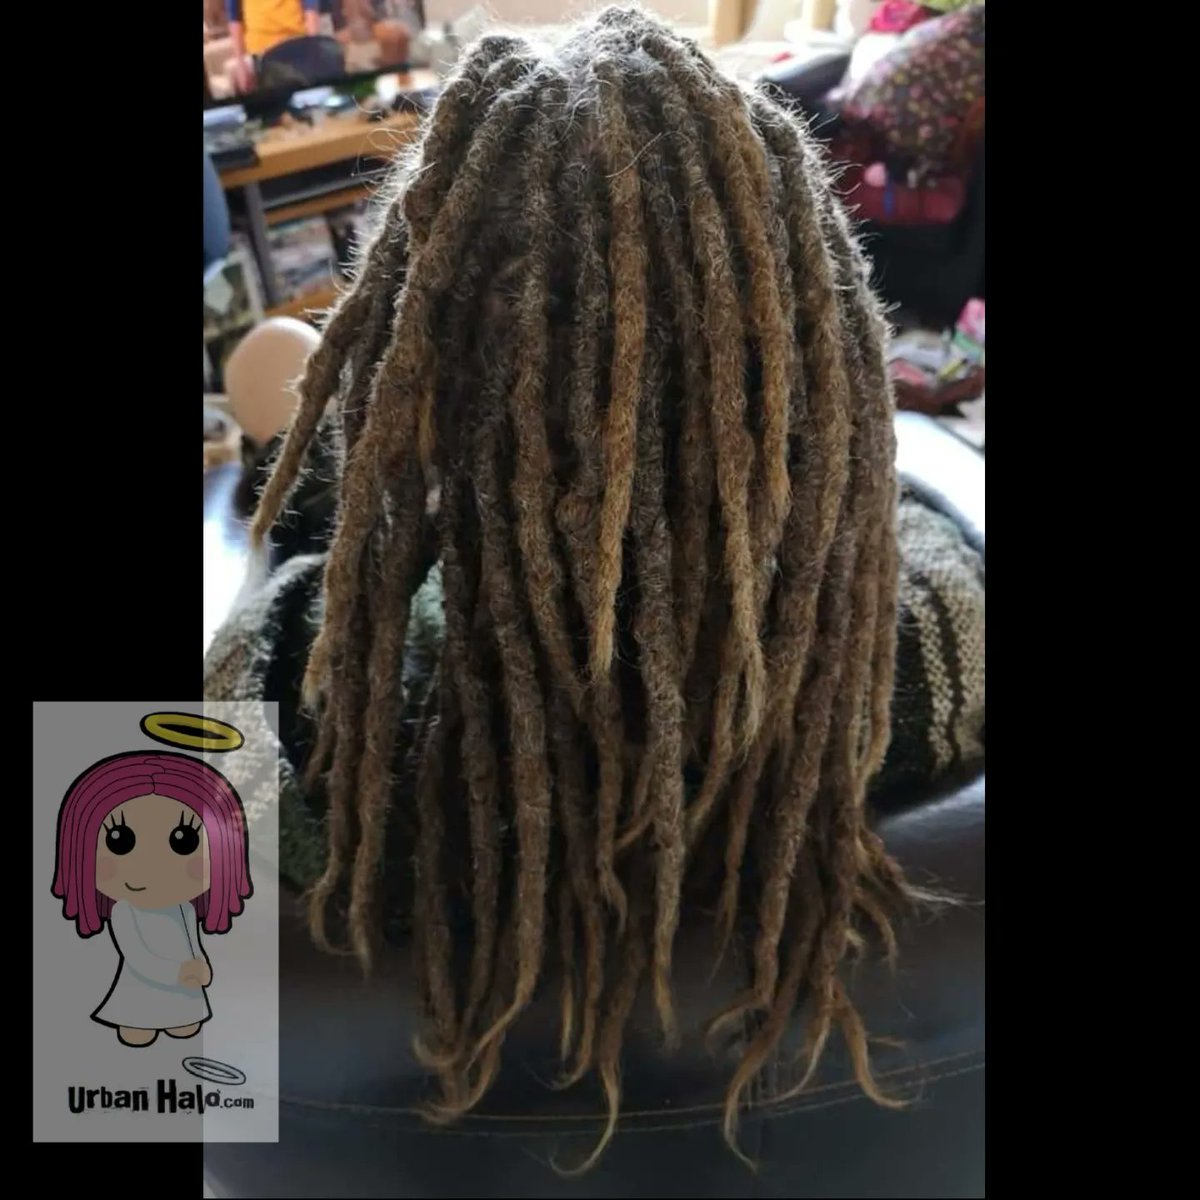 I ❤️ hair growth pics! Richard's gorgeous dreads at 8(ish?) years vs at about 1. He has fab hair to work with, and lots of it! 👌❤️😇 #urbanhalouk #dreadlocks #dreads #dreadmaintenance #ukdreads #newcastledreads #longdreads #menwithdreads #dreadgoals #dreadlife #dreadlove #fyp